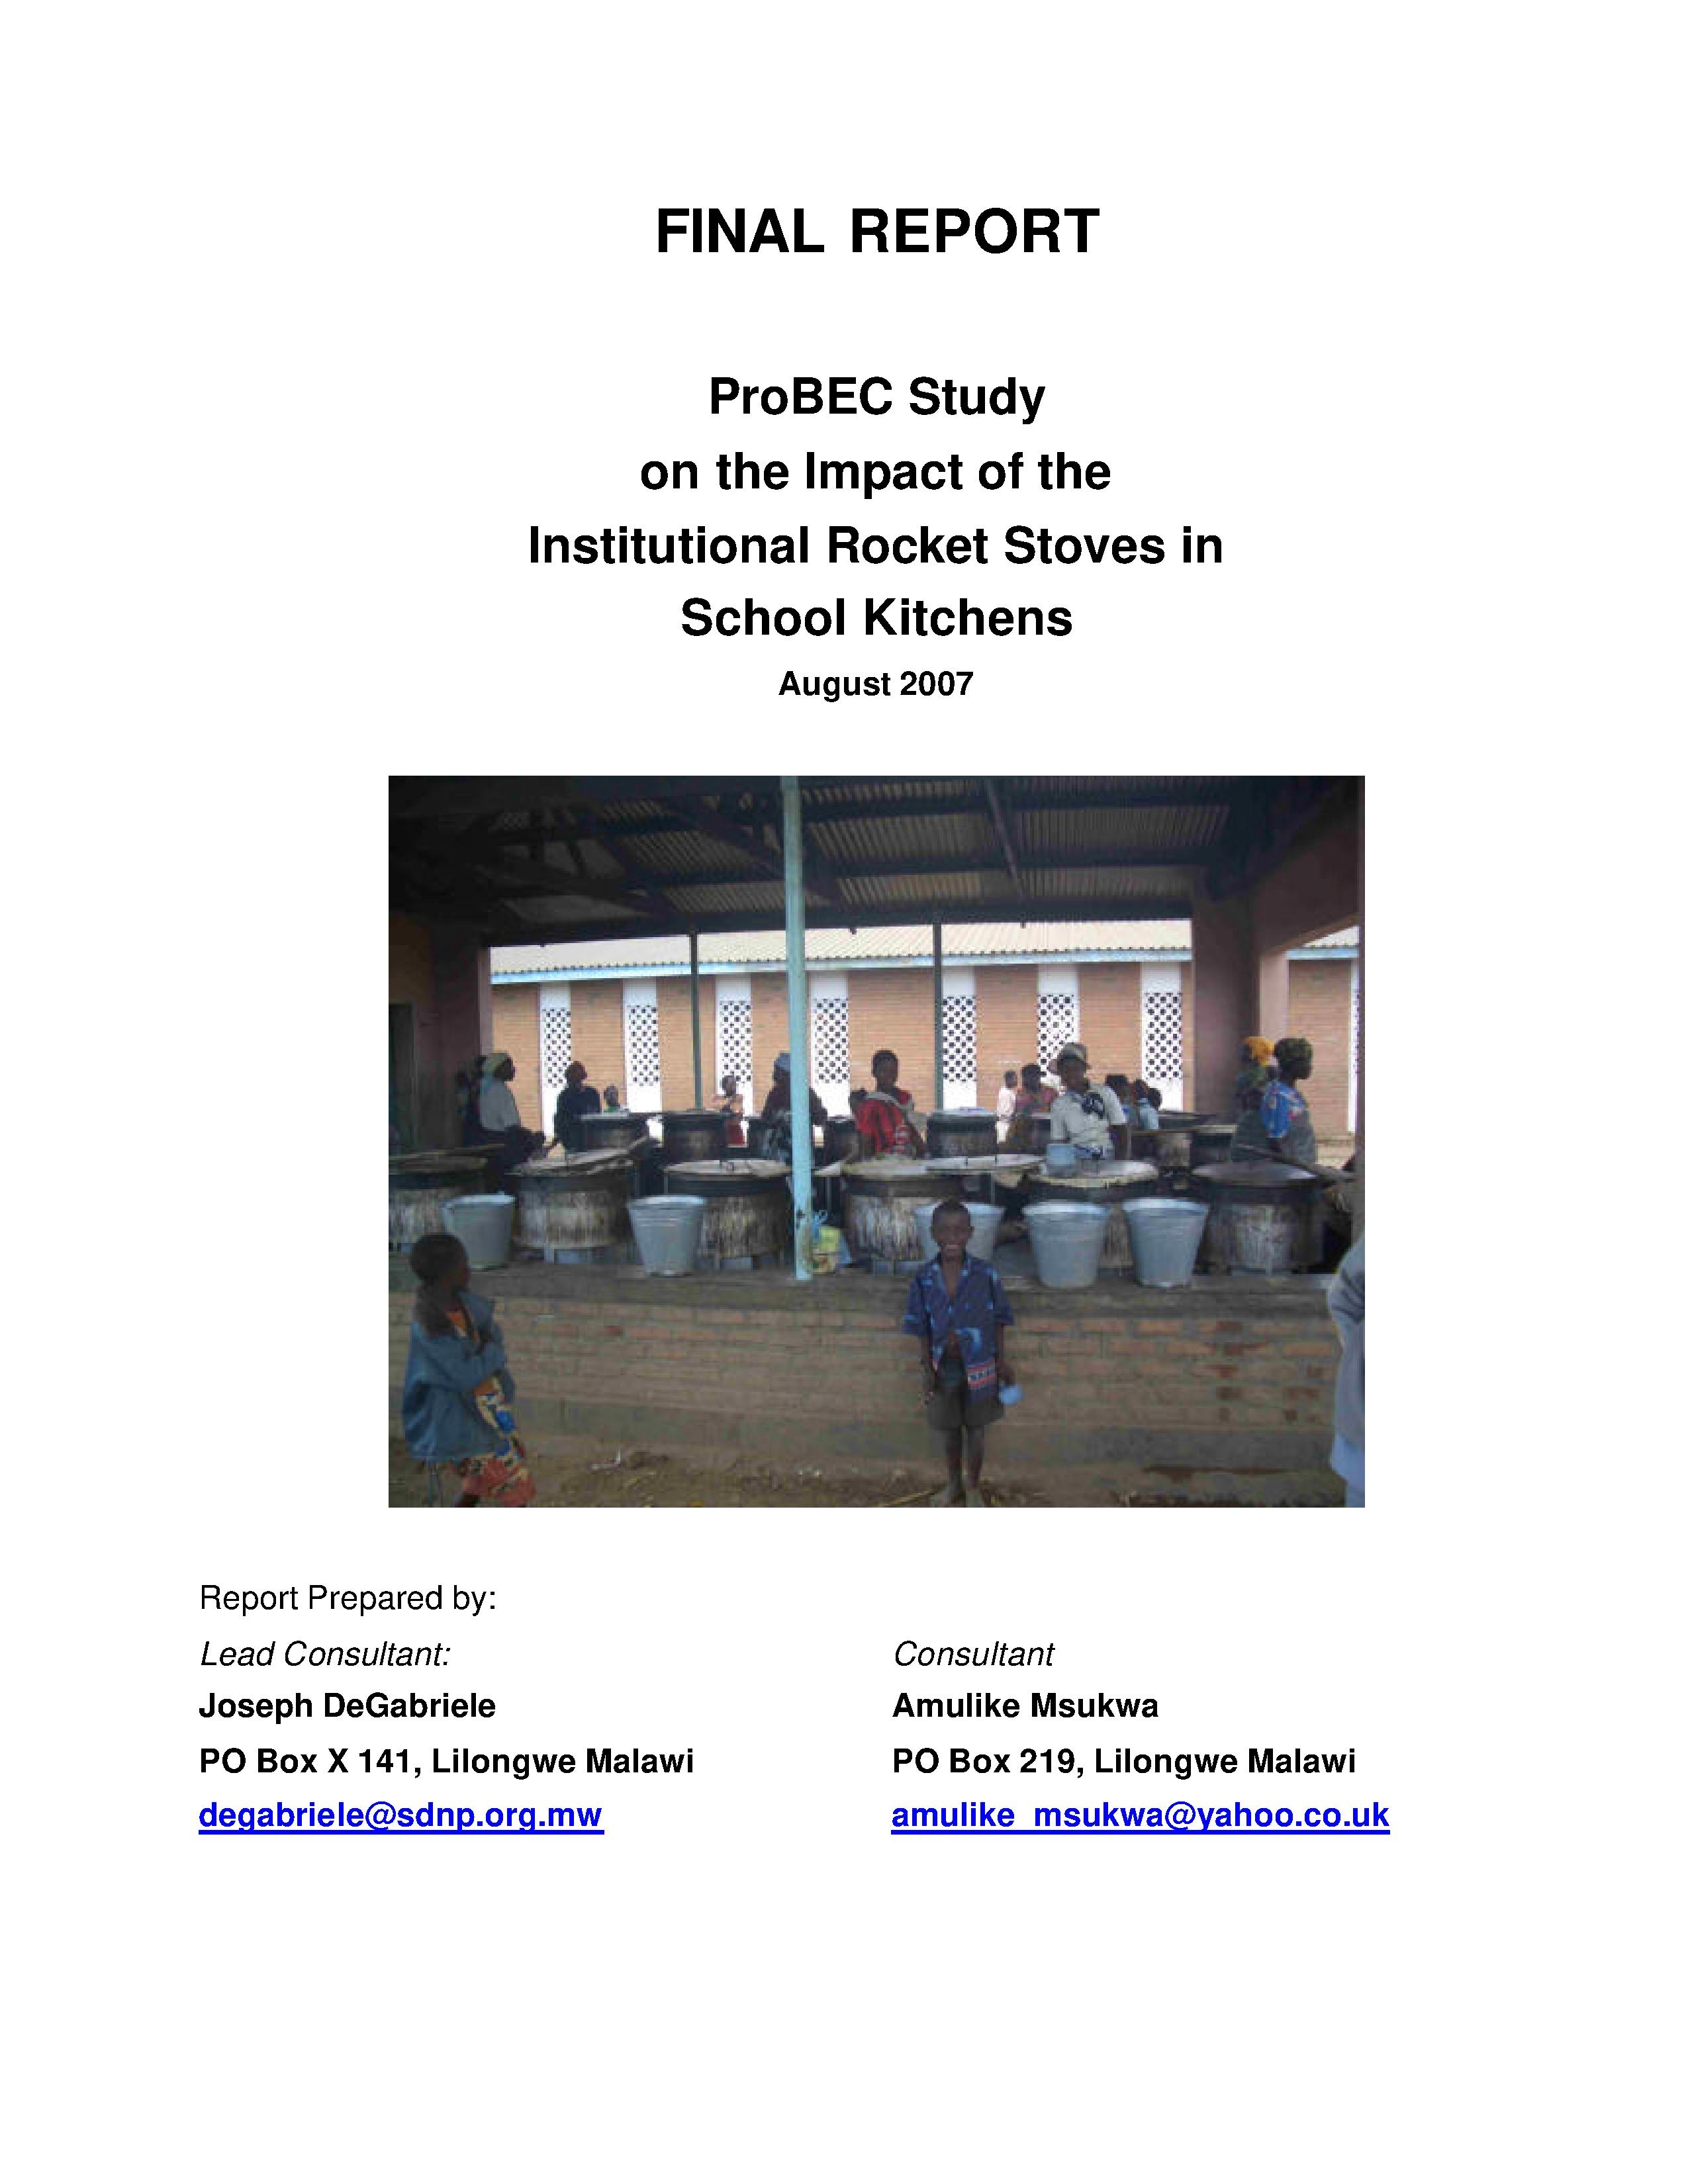 ProBEC Study on the Impact of the Institutional Rocket Stoves in School Kitchens 2007